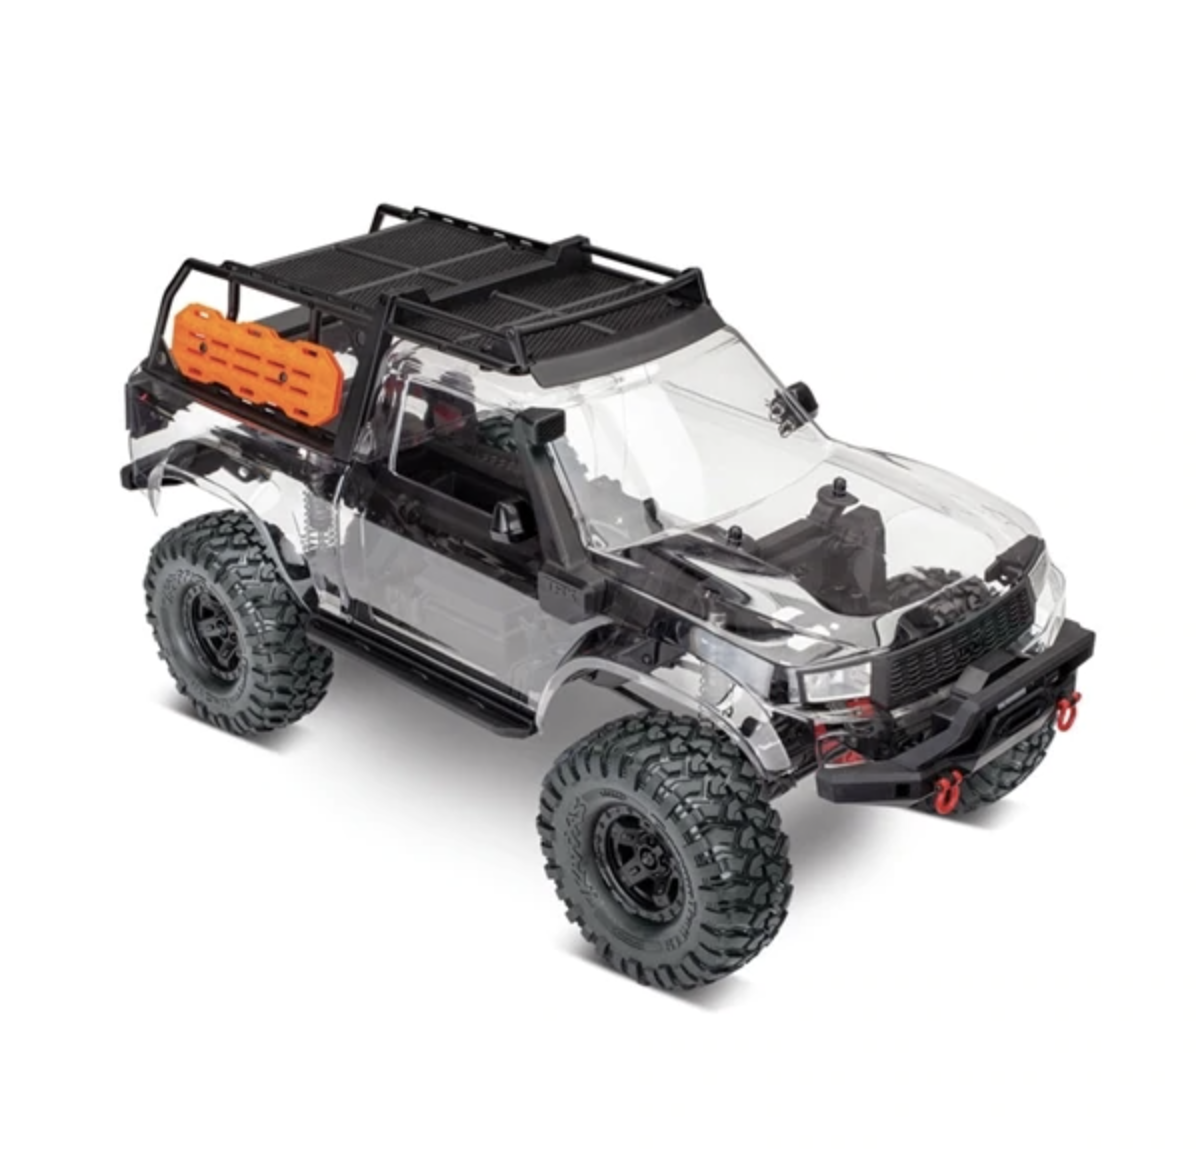 build your own rc truck kit